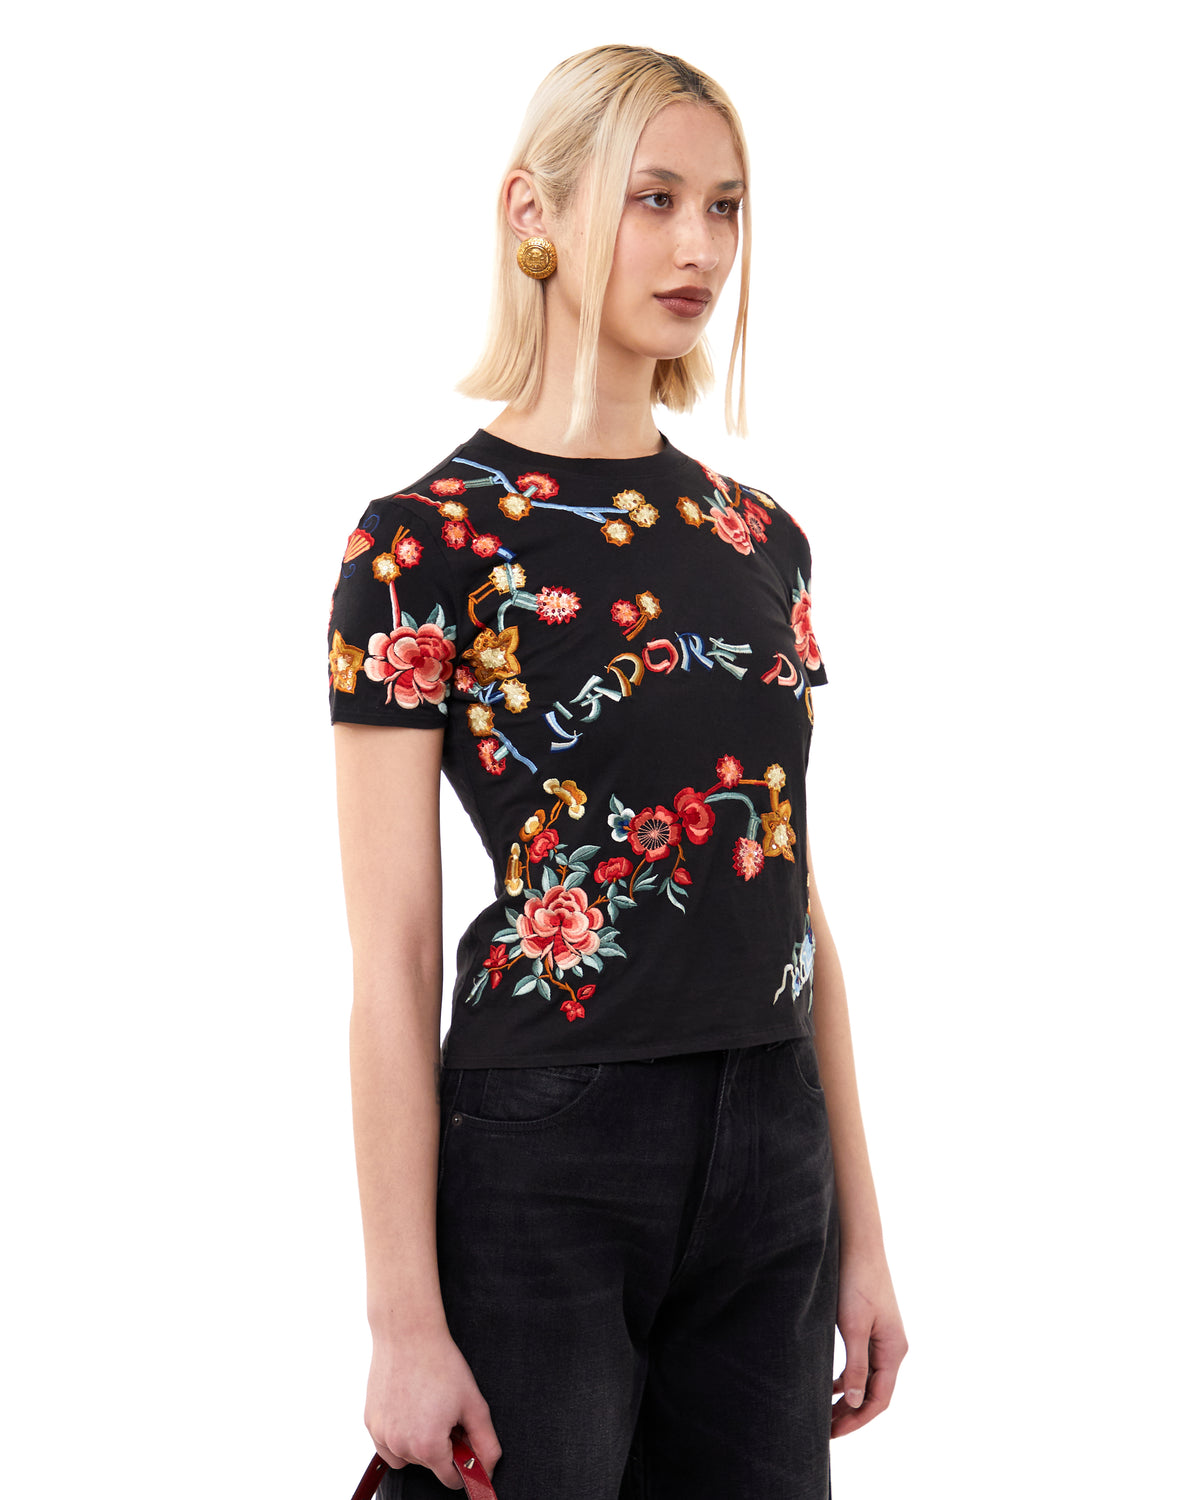 Pre-Owned Floral Embroidered J'adore Dior T-Shirt